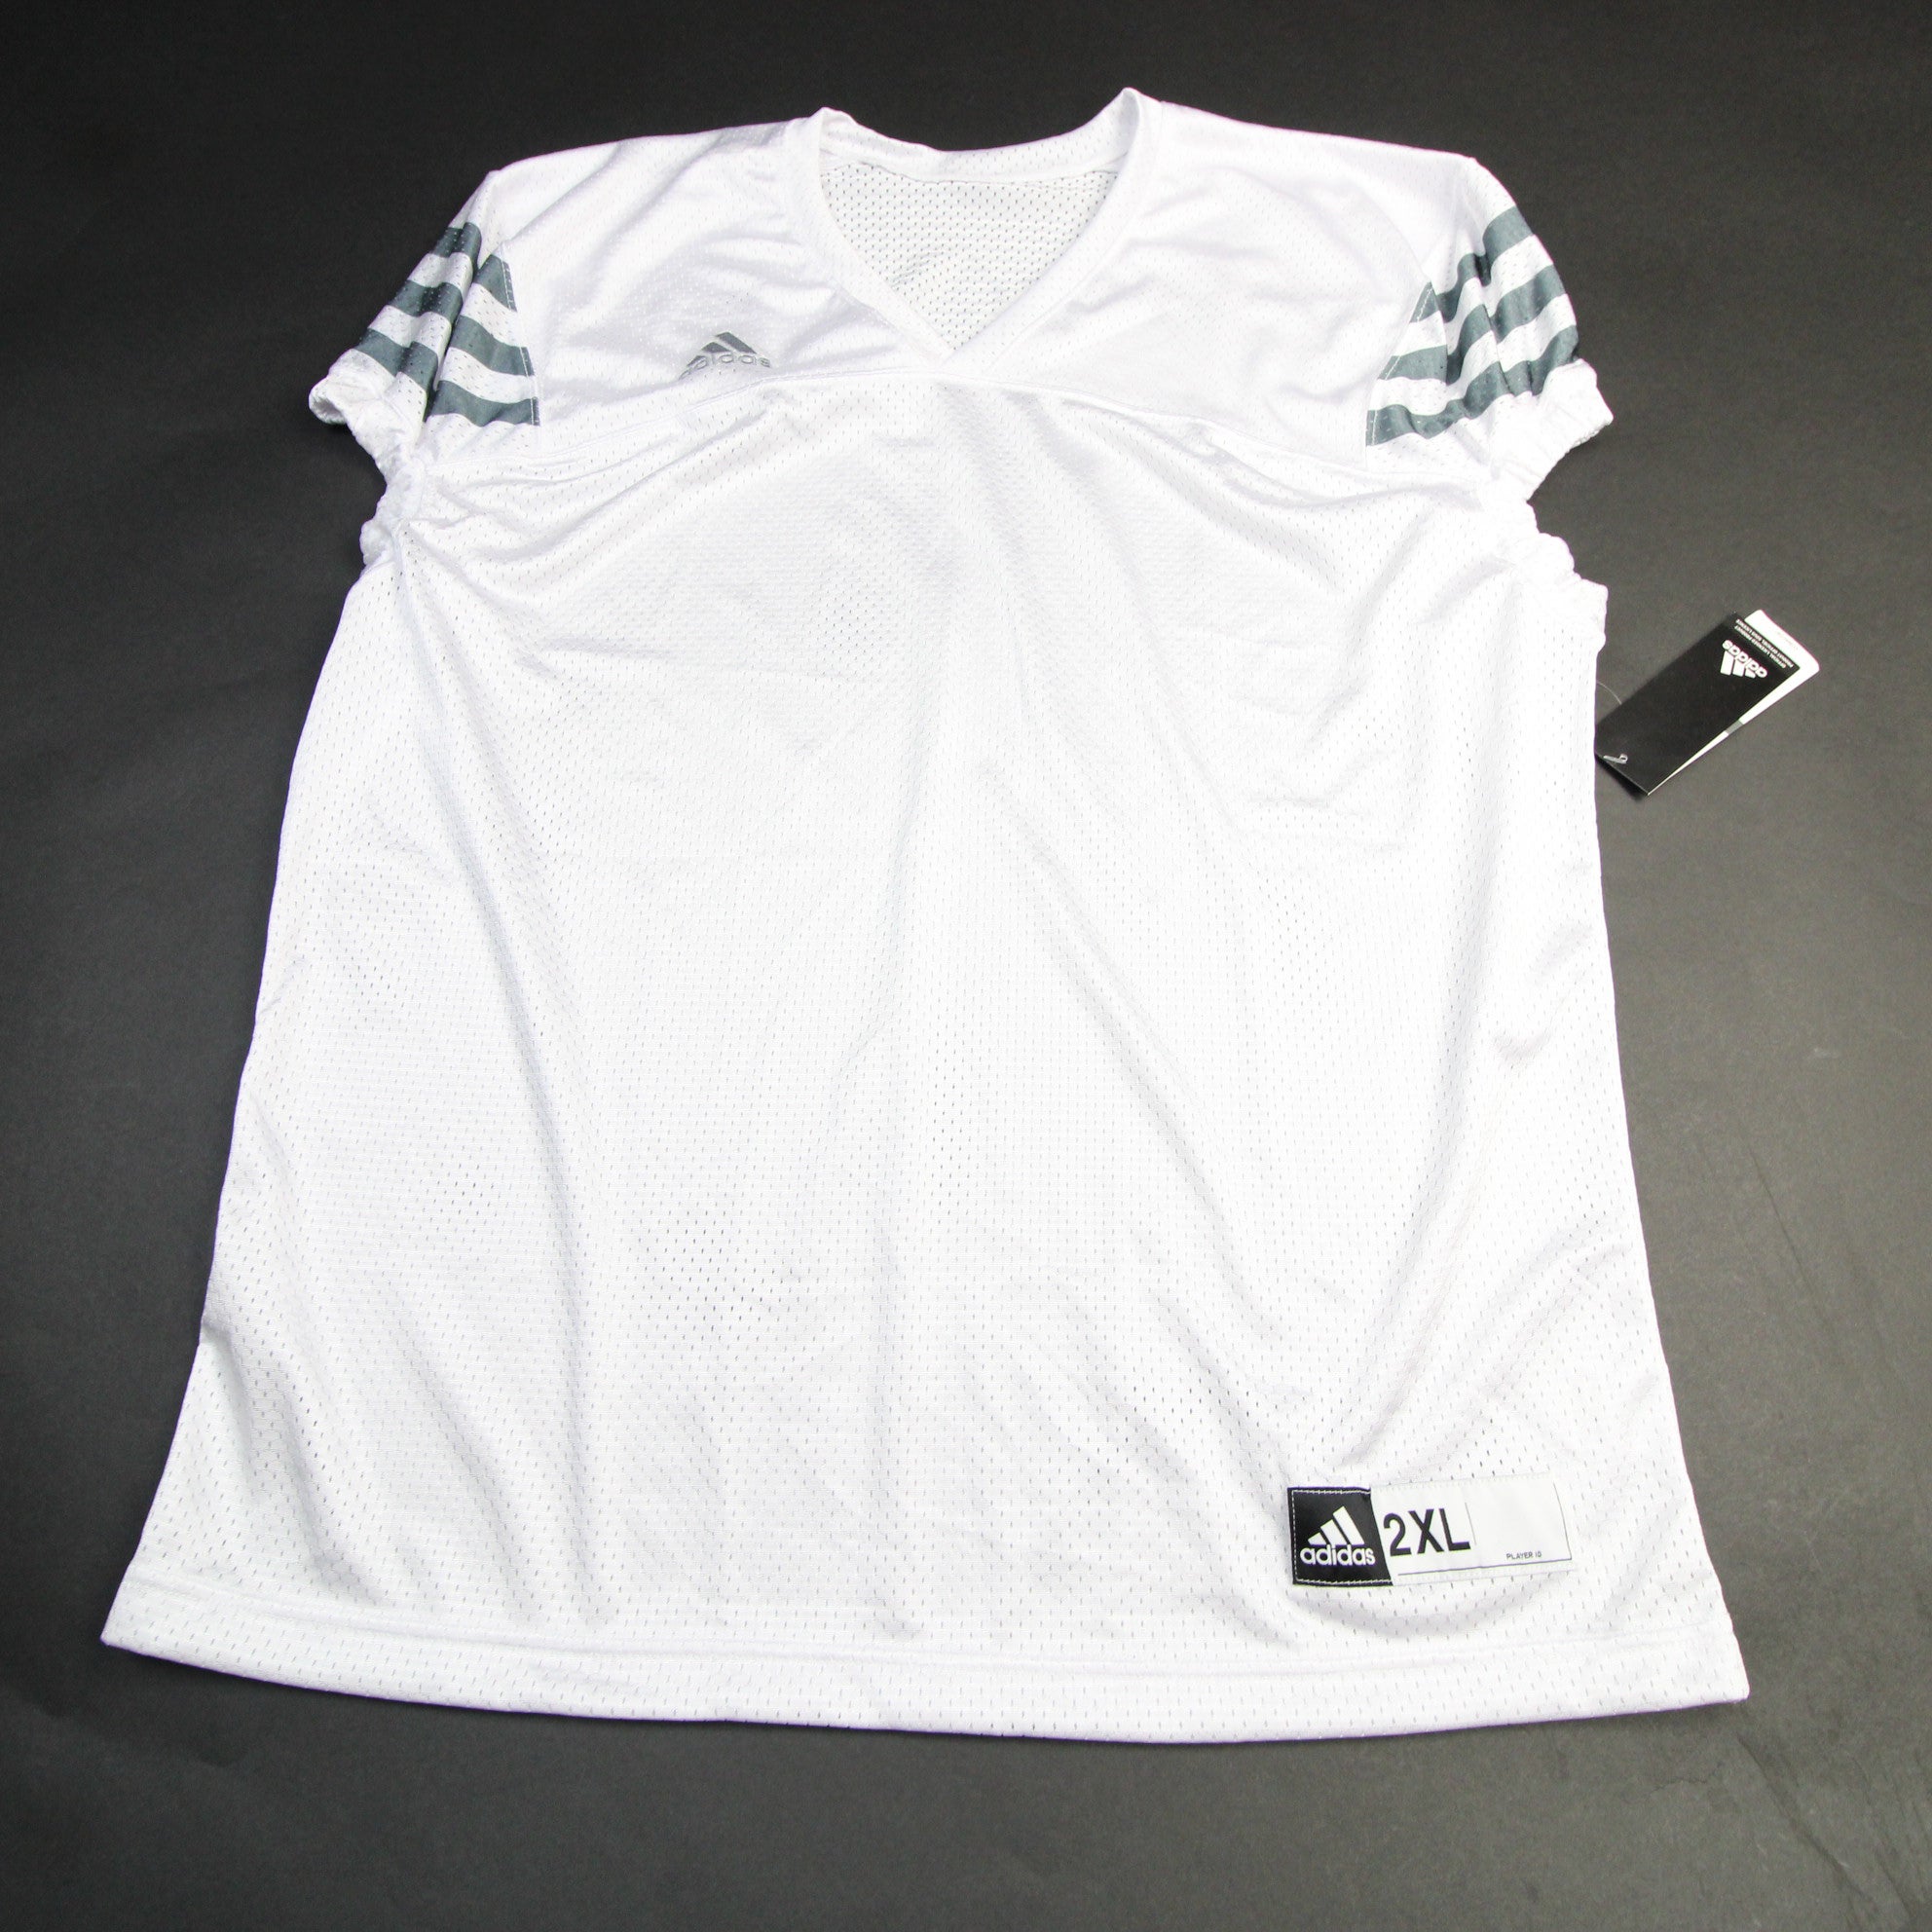 adidas Practice Jersey - Other Youth Dark Green/White New with Tags